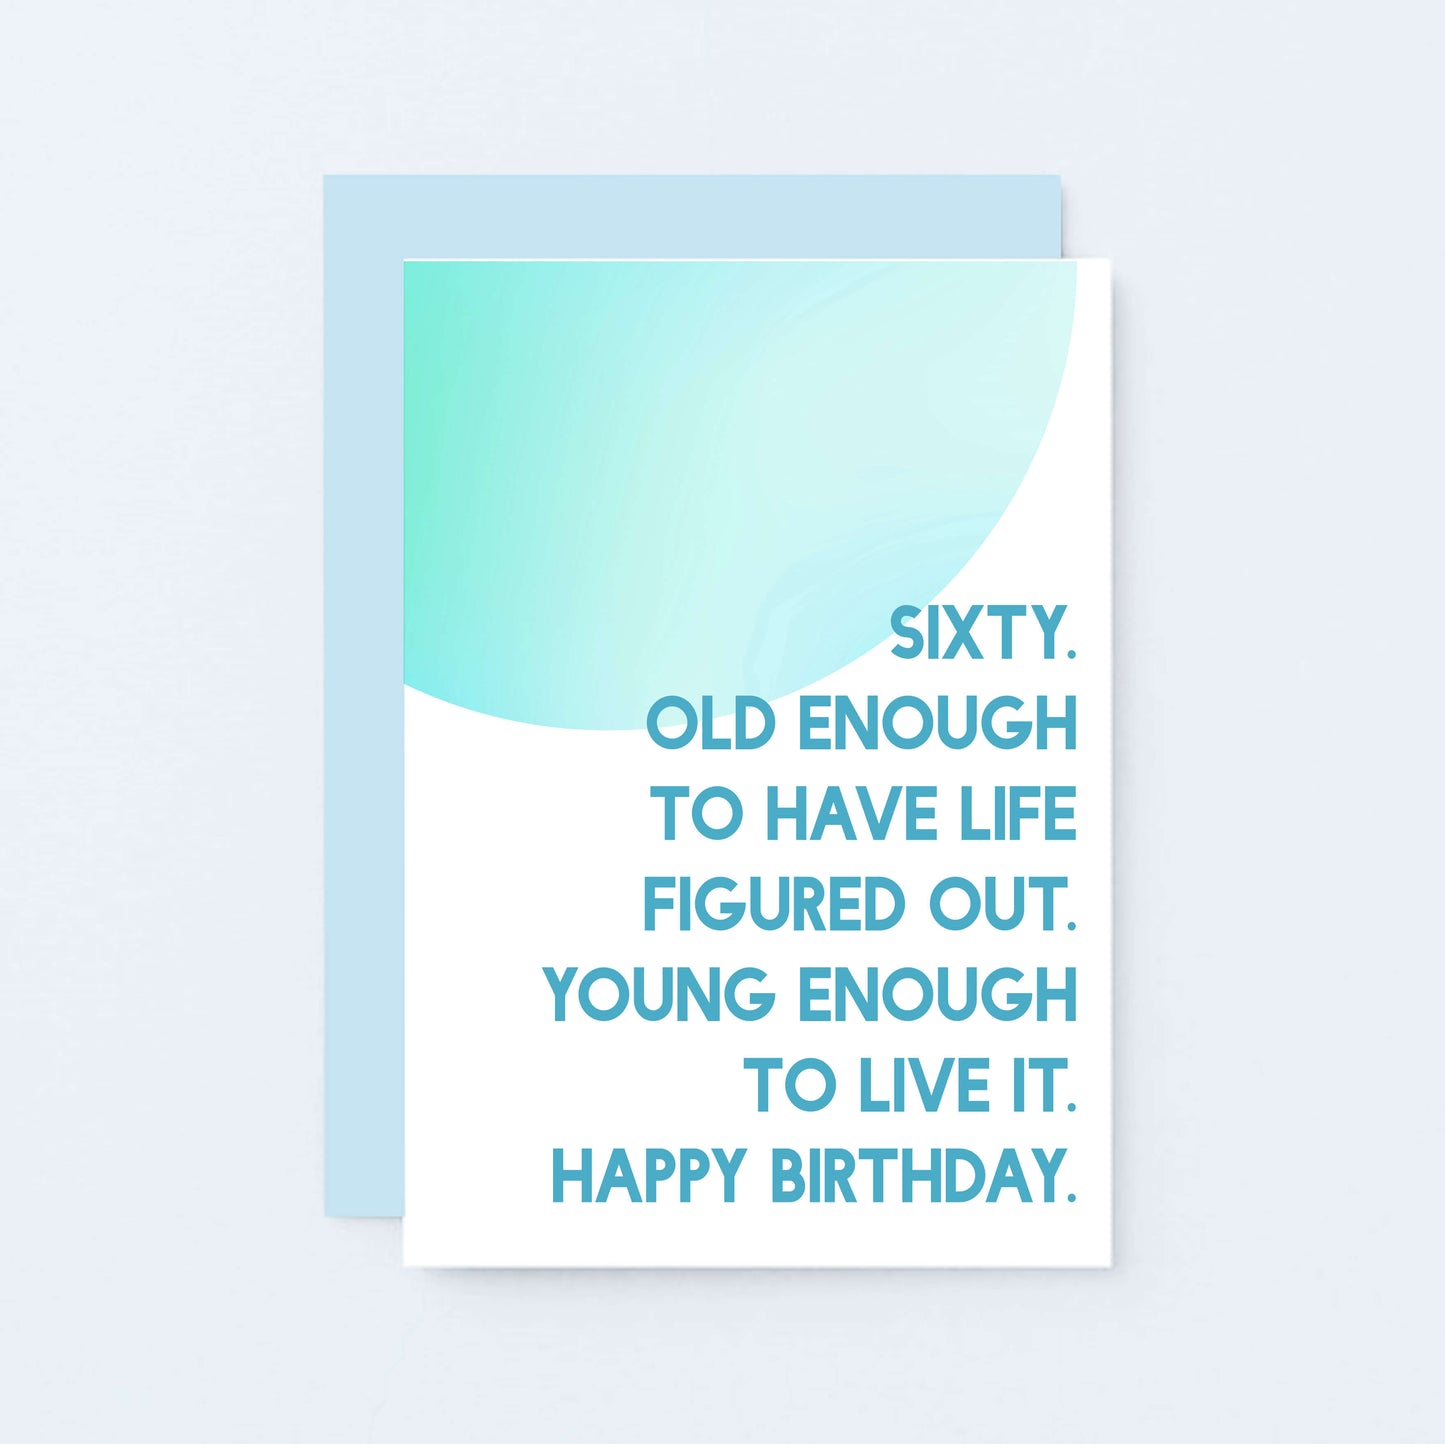 60th Birthday Card by SixElevenCreations. Reads Sixty. Old enough to have life figured out. Young enough to live it. Happy birthday. Product Code SE2057A6